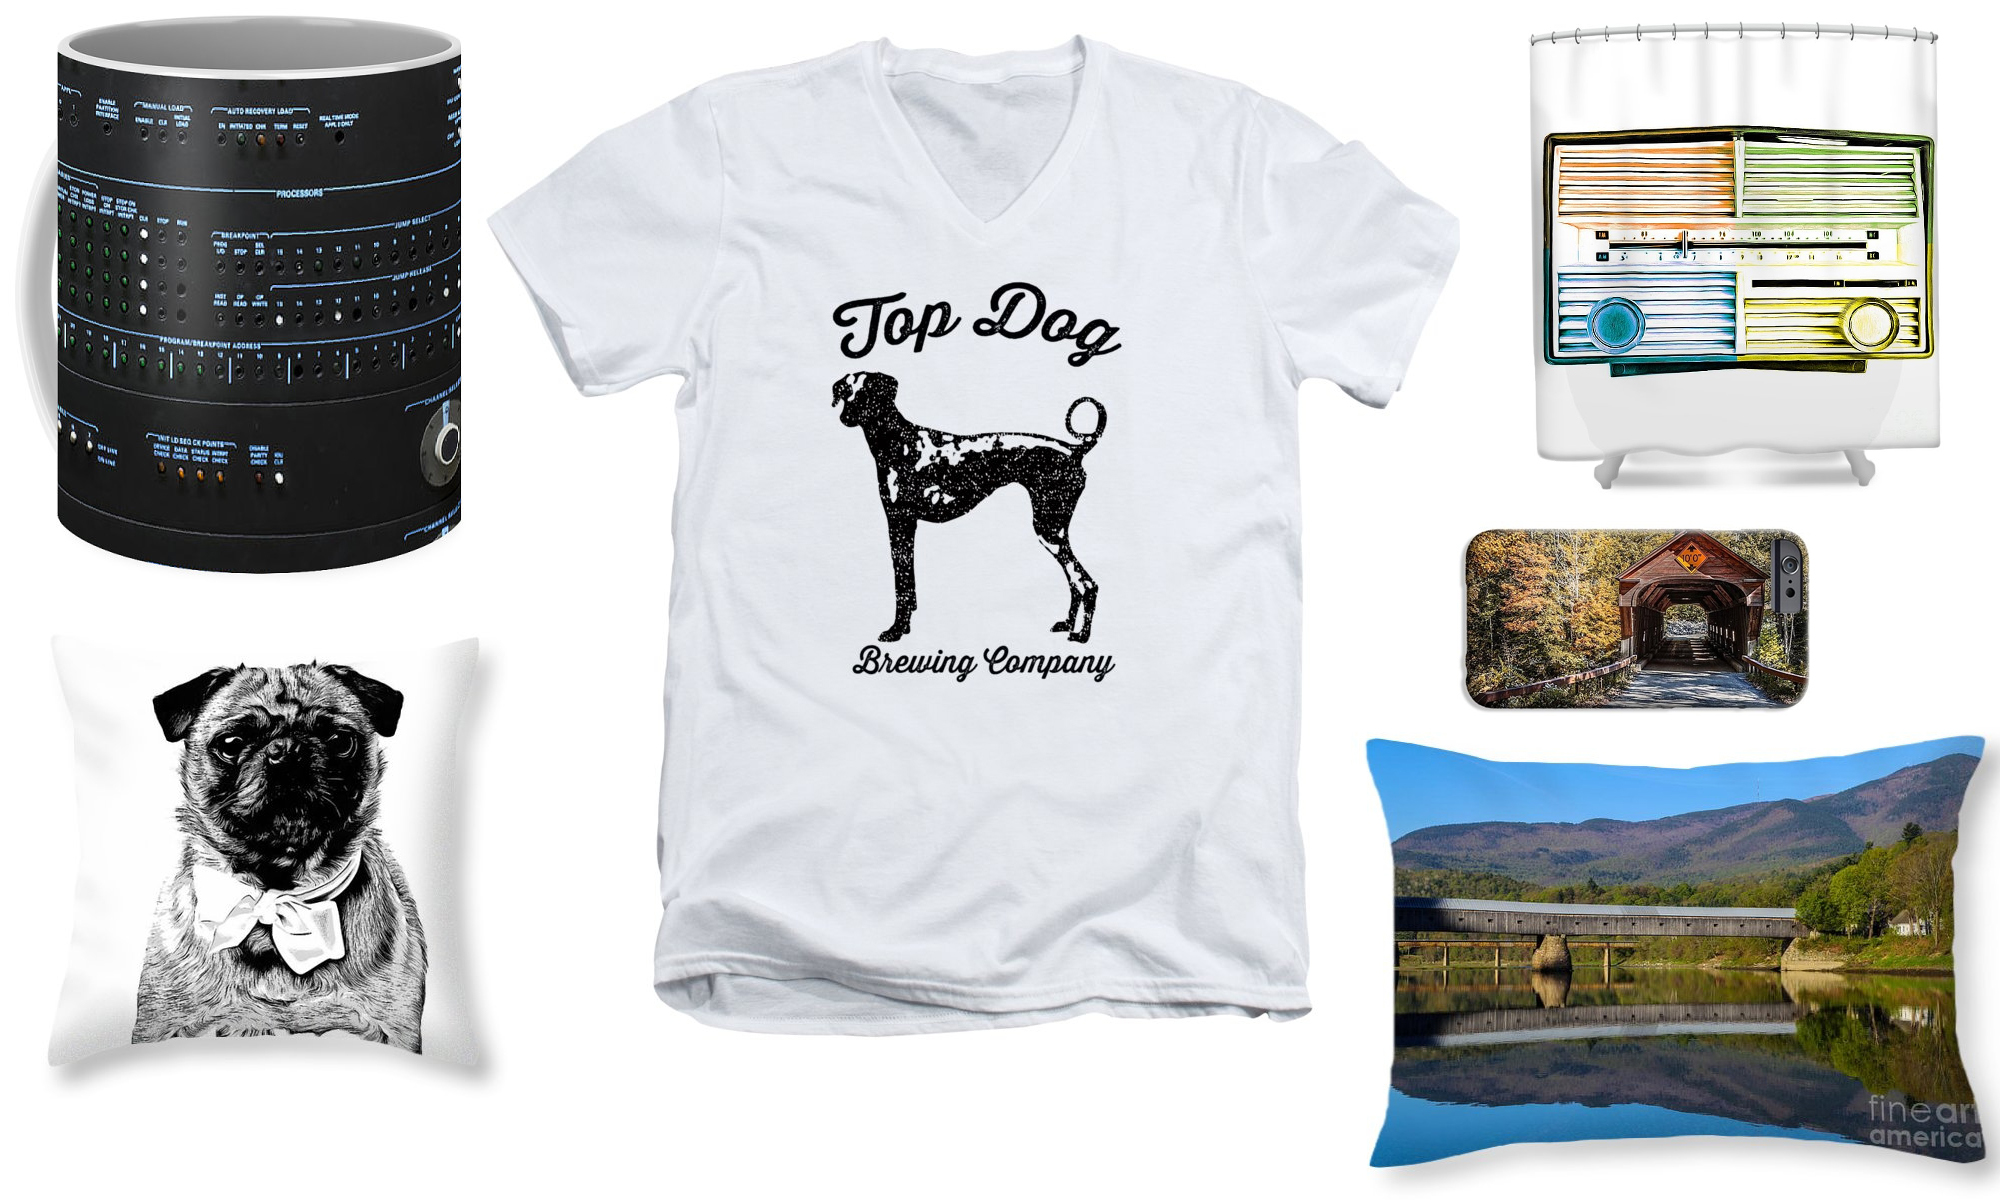 T-shirts, phone cases, tote bags, throw pillows, shower curtains and more!